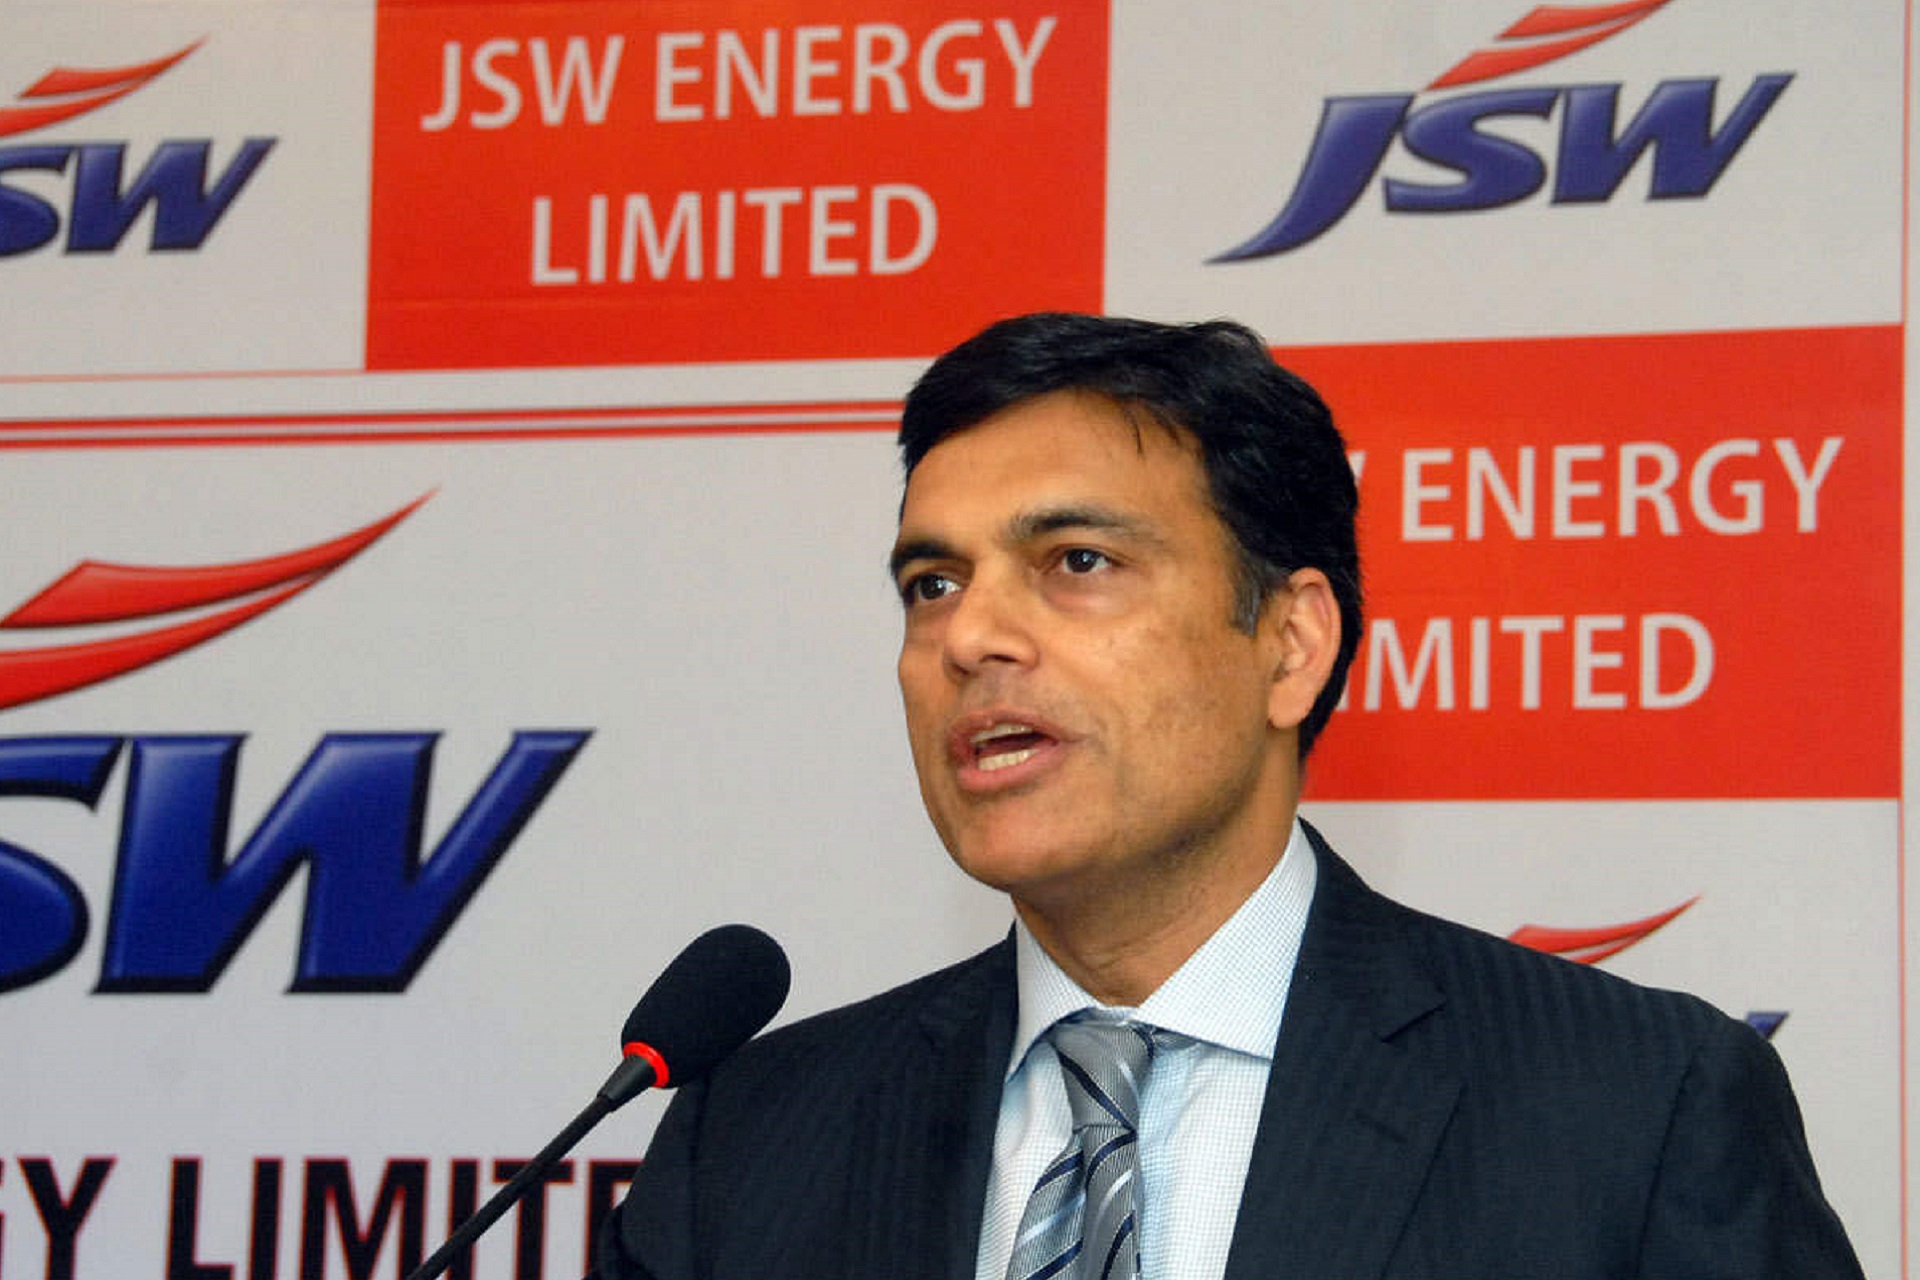 JSW Group Offers ₹ 3 Lakh EV Buying Incentive To Its Employees